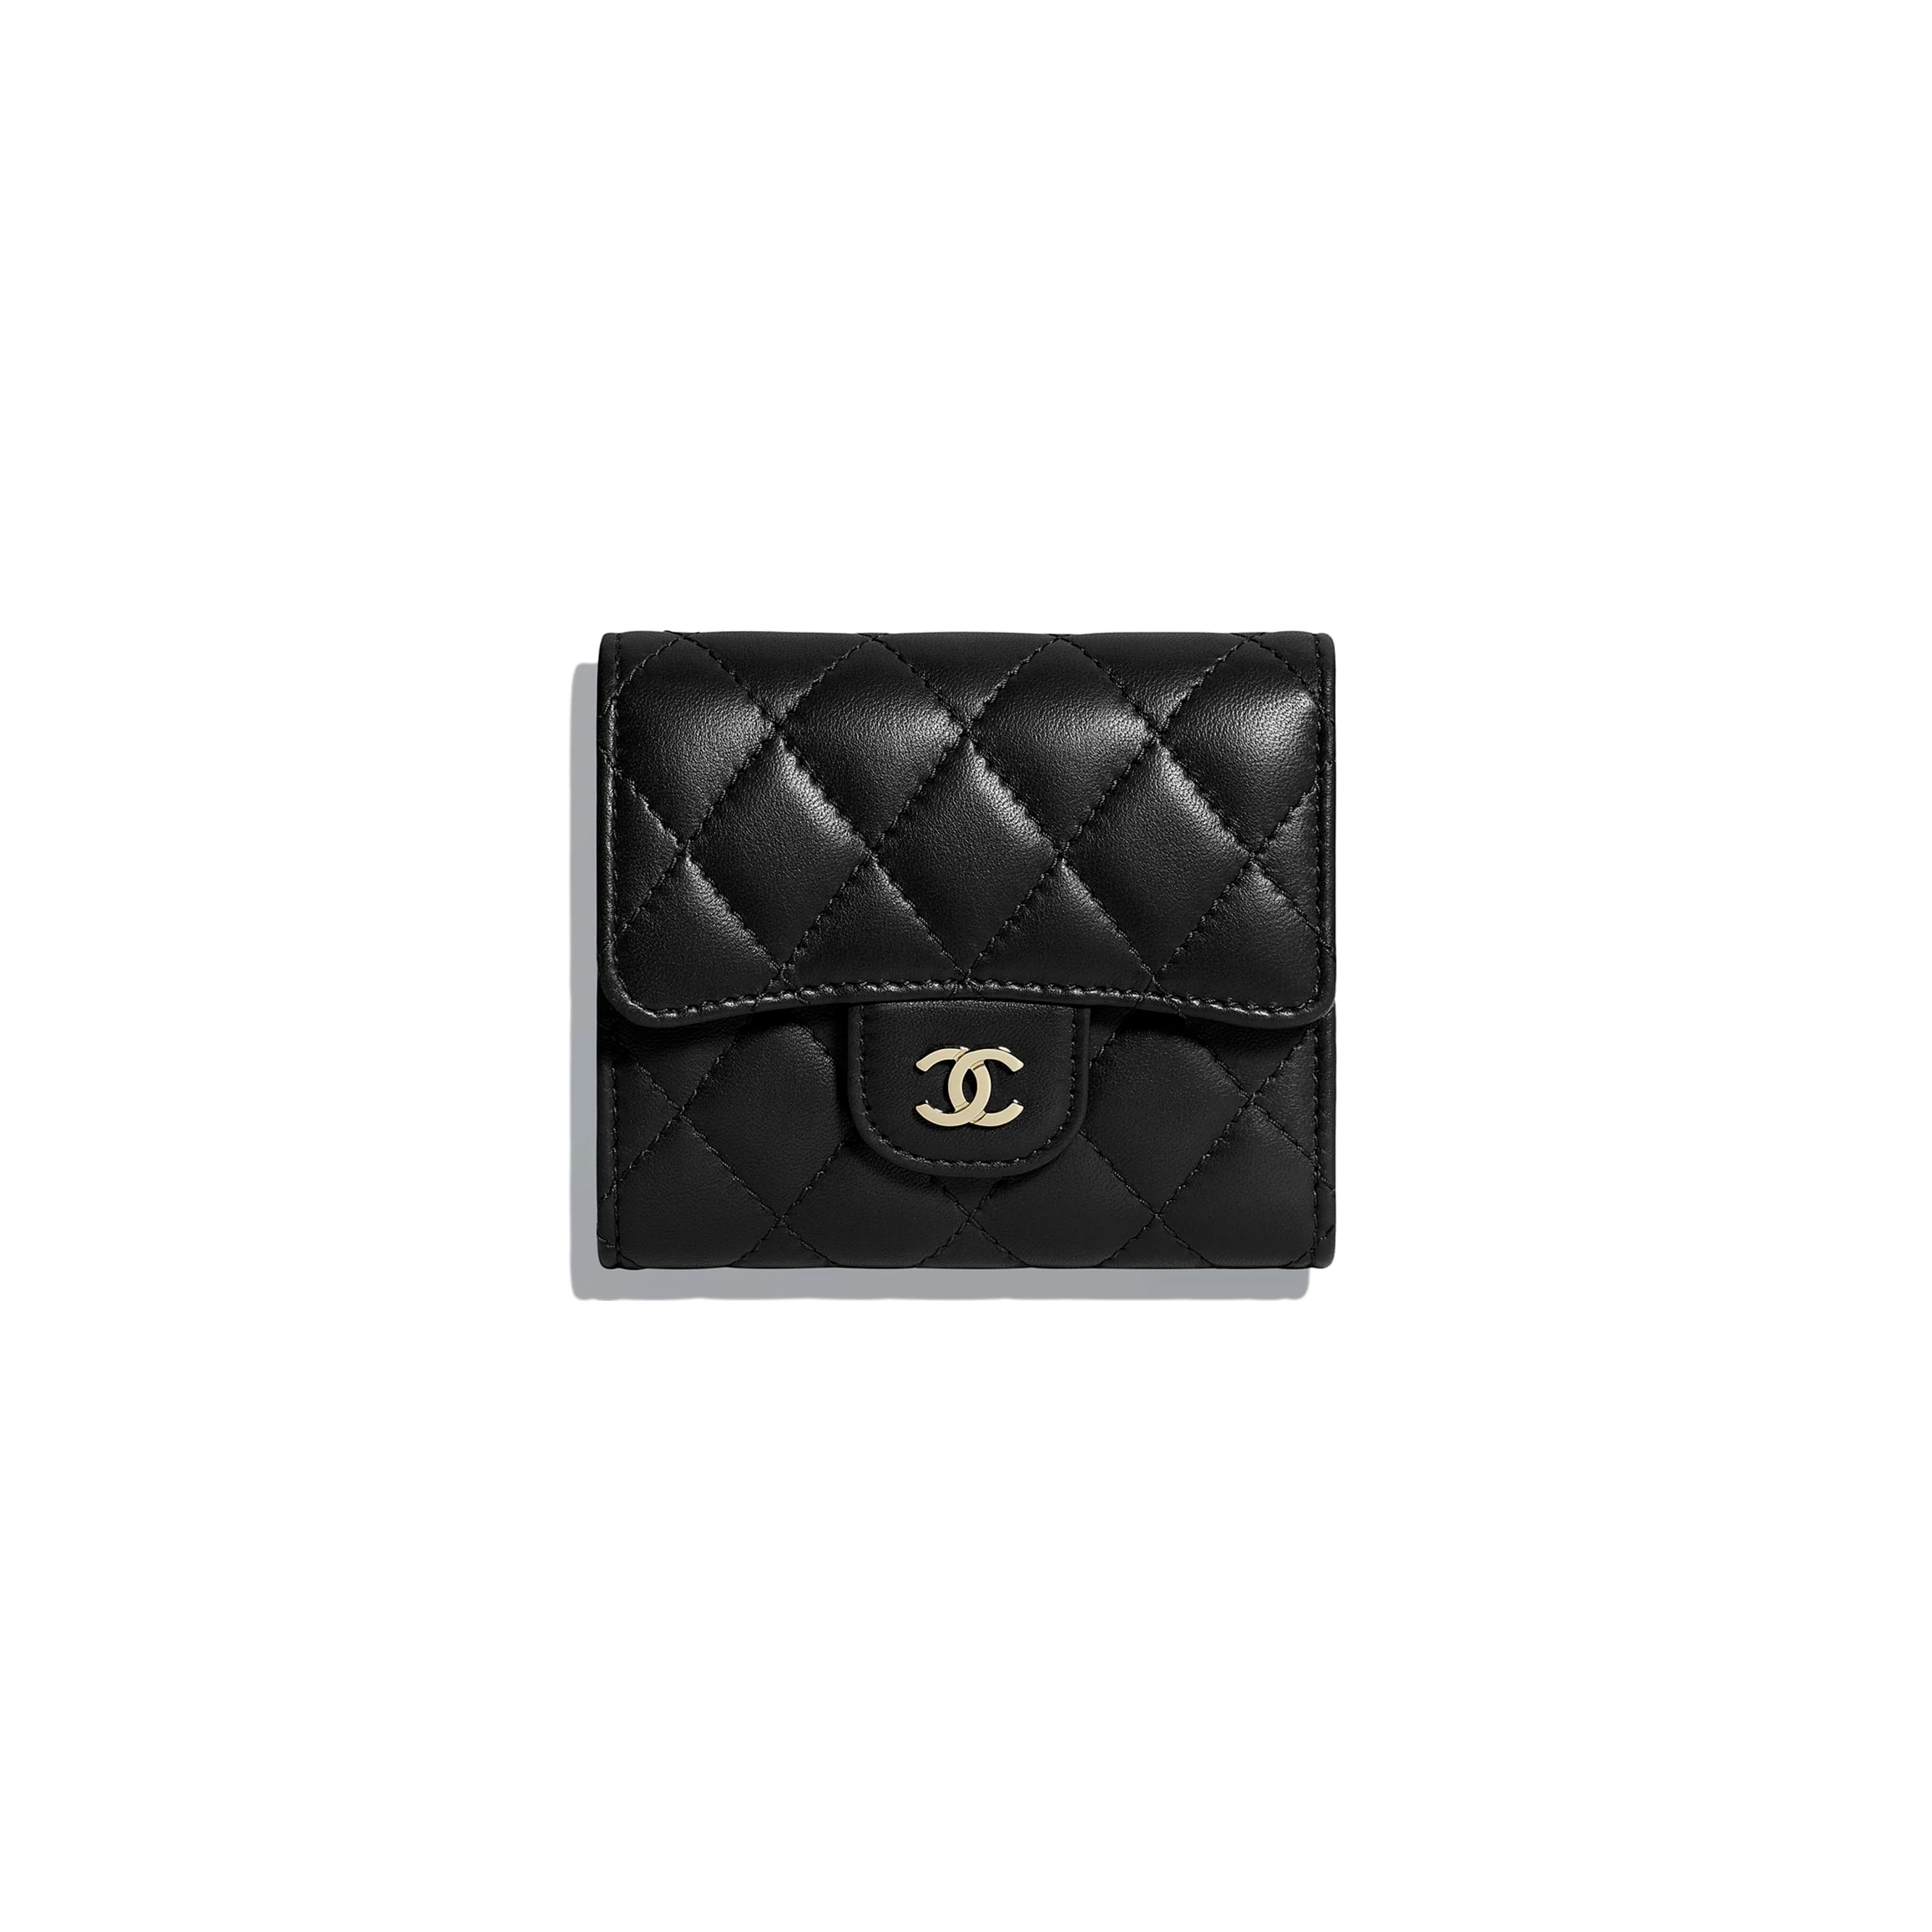 CHANEL ZIP CARD HOLDER REVIEW 